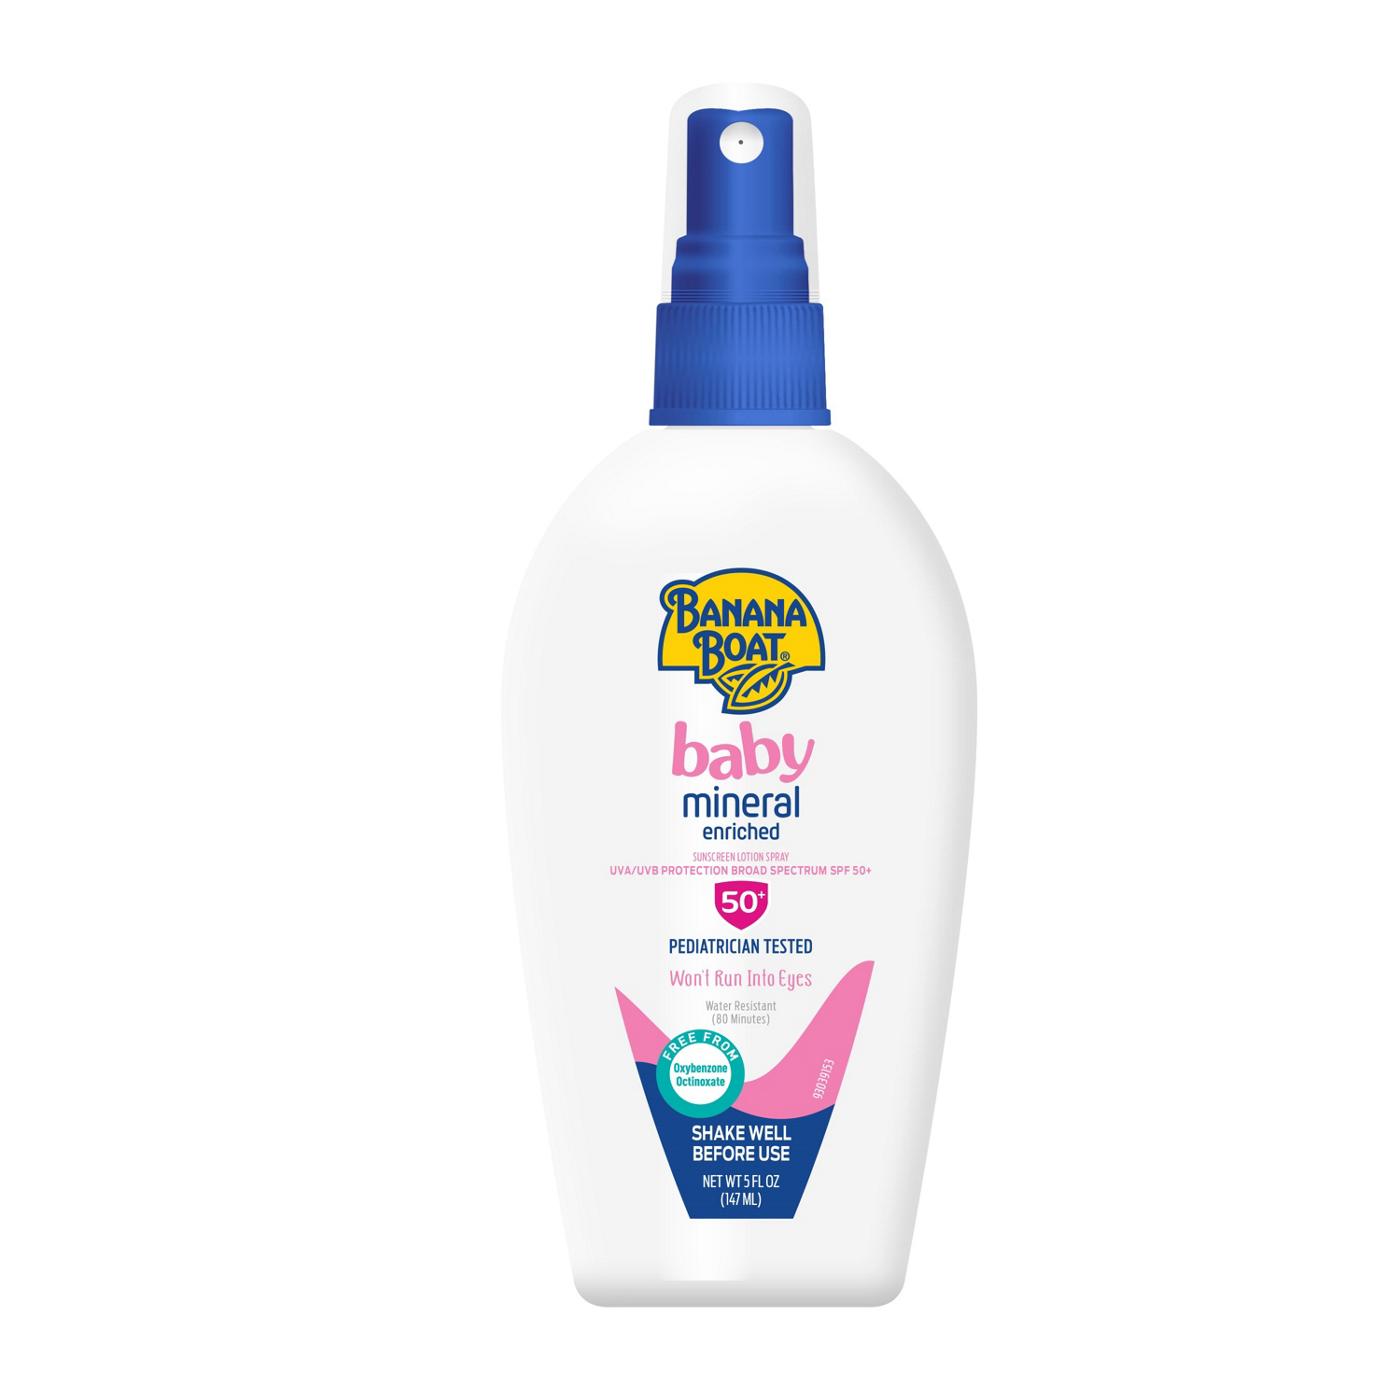 Banana Boat Baby Mineral Enriched Sunscreen Lotion Spray - SPF 50+; image 1 of 7